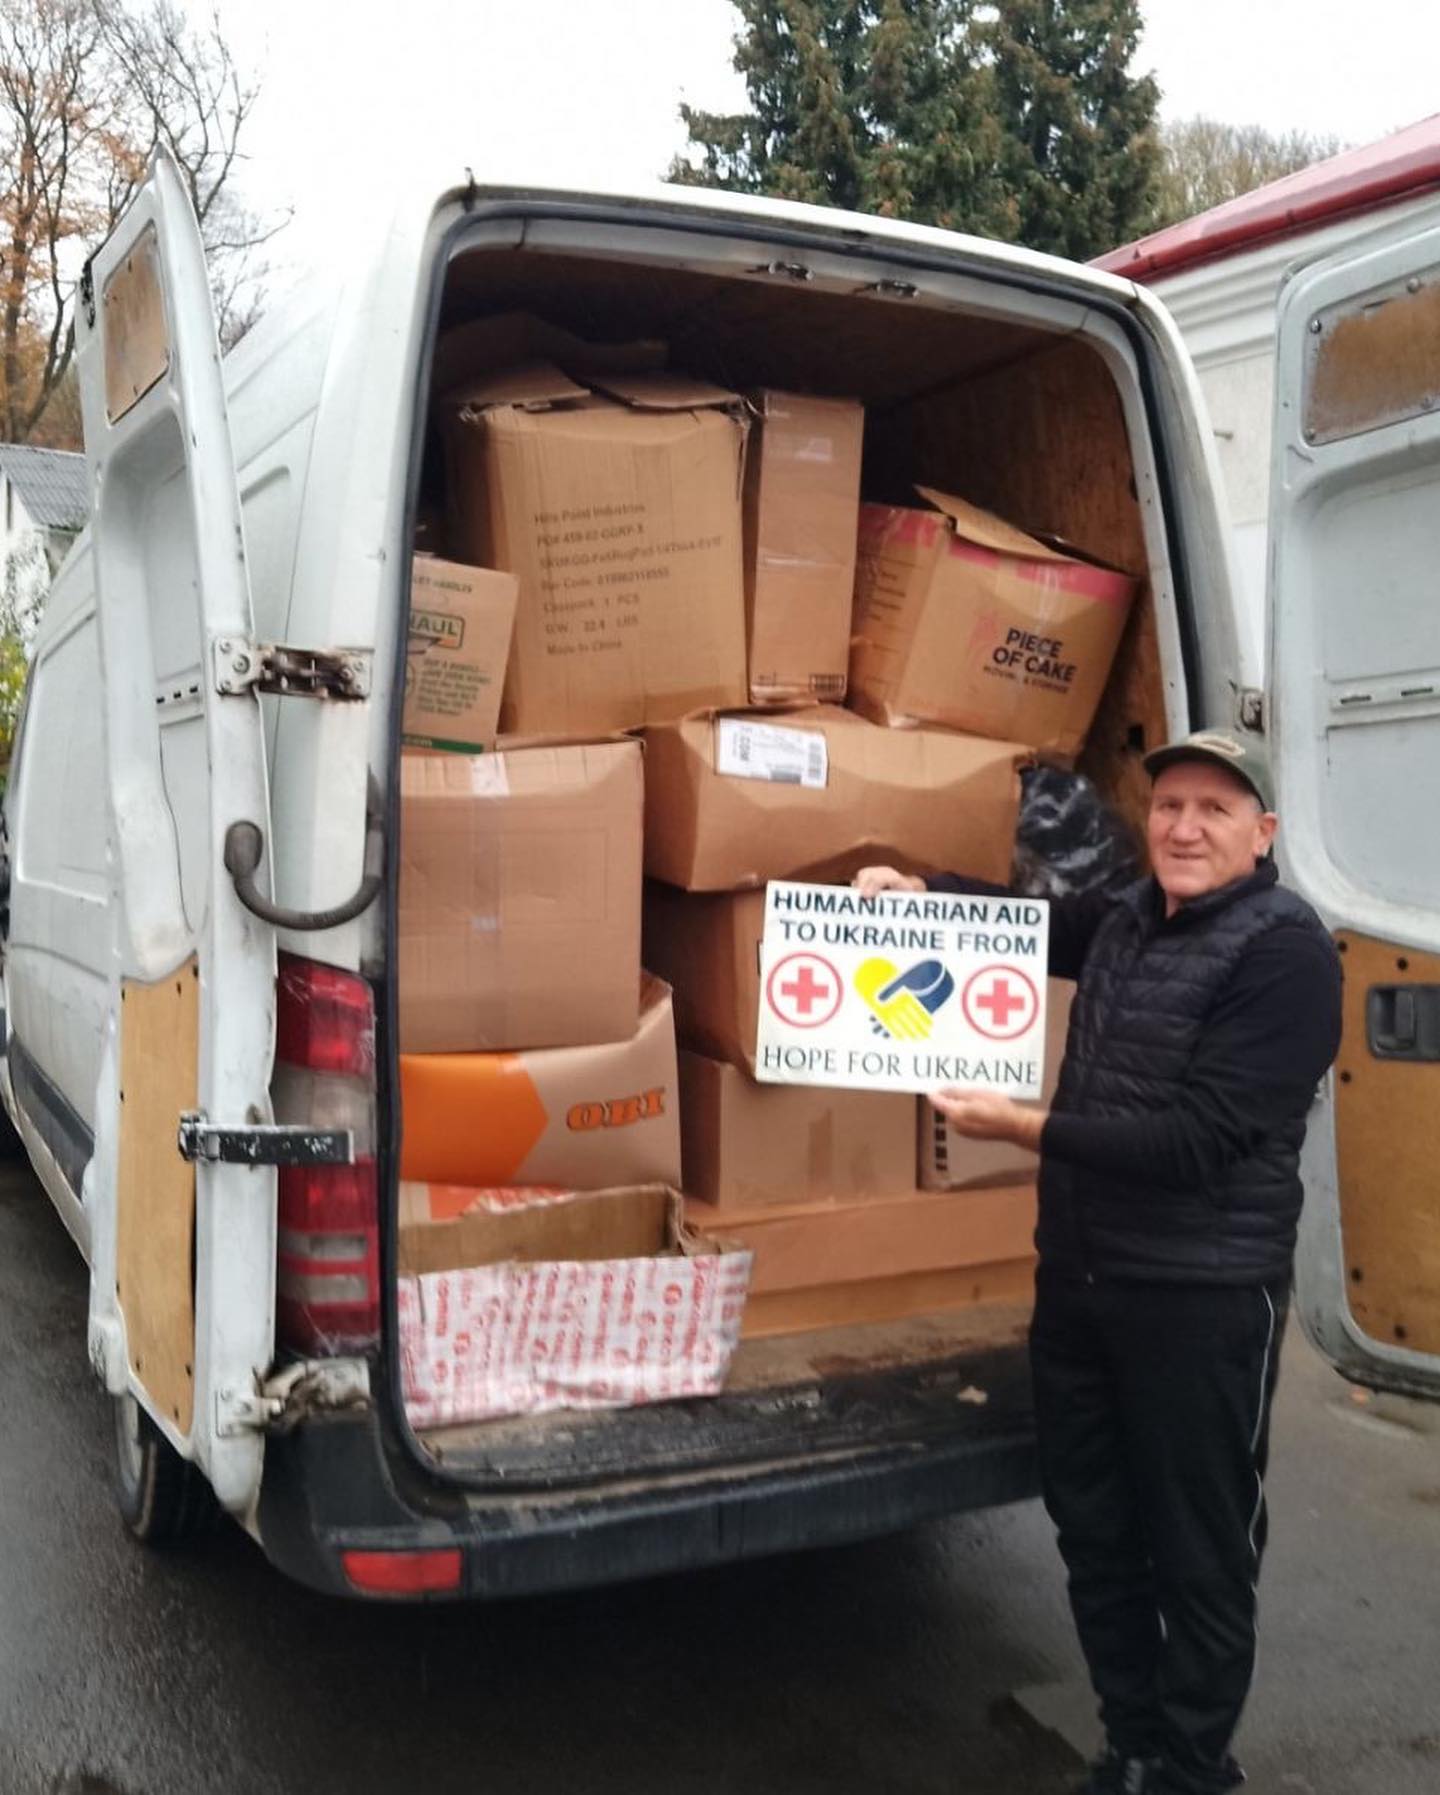 A man standing next to a van full of boxes.